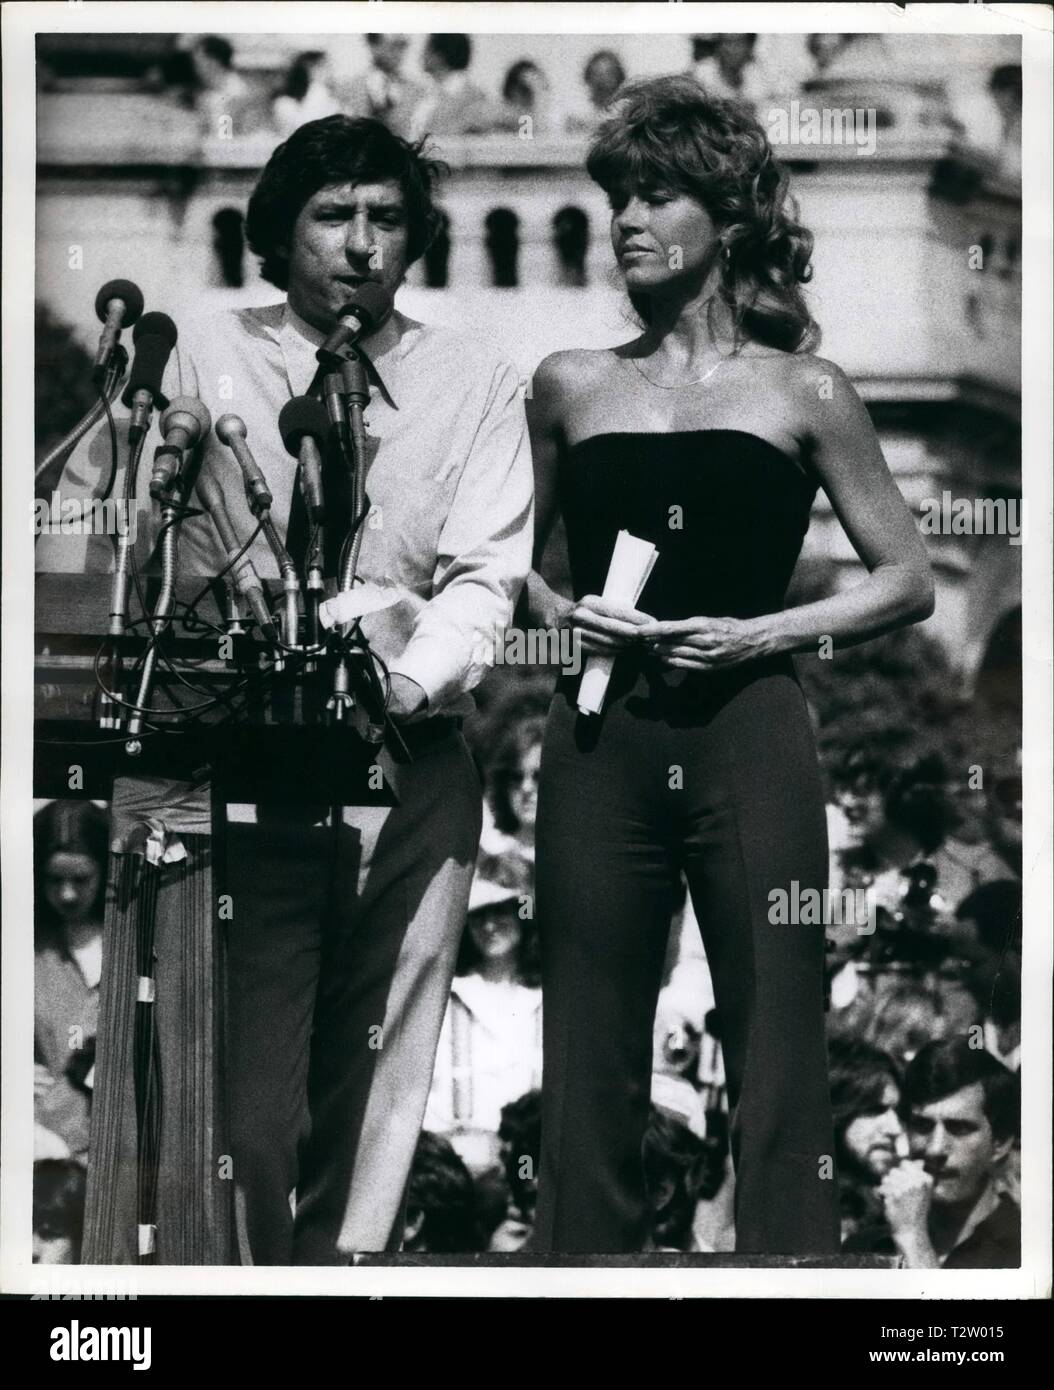 May 6, 1979, Washington, DC, U.S. : Movie star JANE FONDA, star of new anti-nuke movie ''The China Syndrome'', with husband/political activist TOM HAYDEN, at the largest gathering of anti-nuclear protests in USA history, to this date, on the steps of US Capital building, in the nations capital. 125,000 people including the Governor of California, attended today's march and rally against nuclear power, reacting to the recent, Three Mile Island March 28, 1979 accident, US commercial nuclear power plant history most significant accident. Rated a five on the seven-point International Nuclear Even Stock Photo